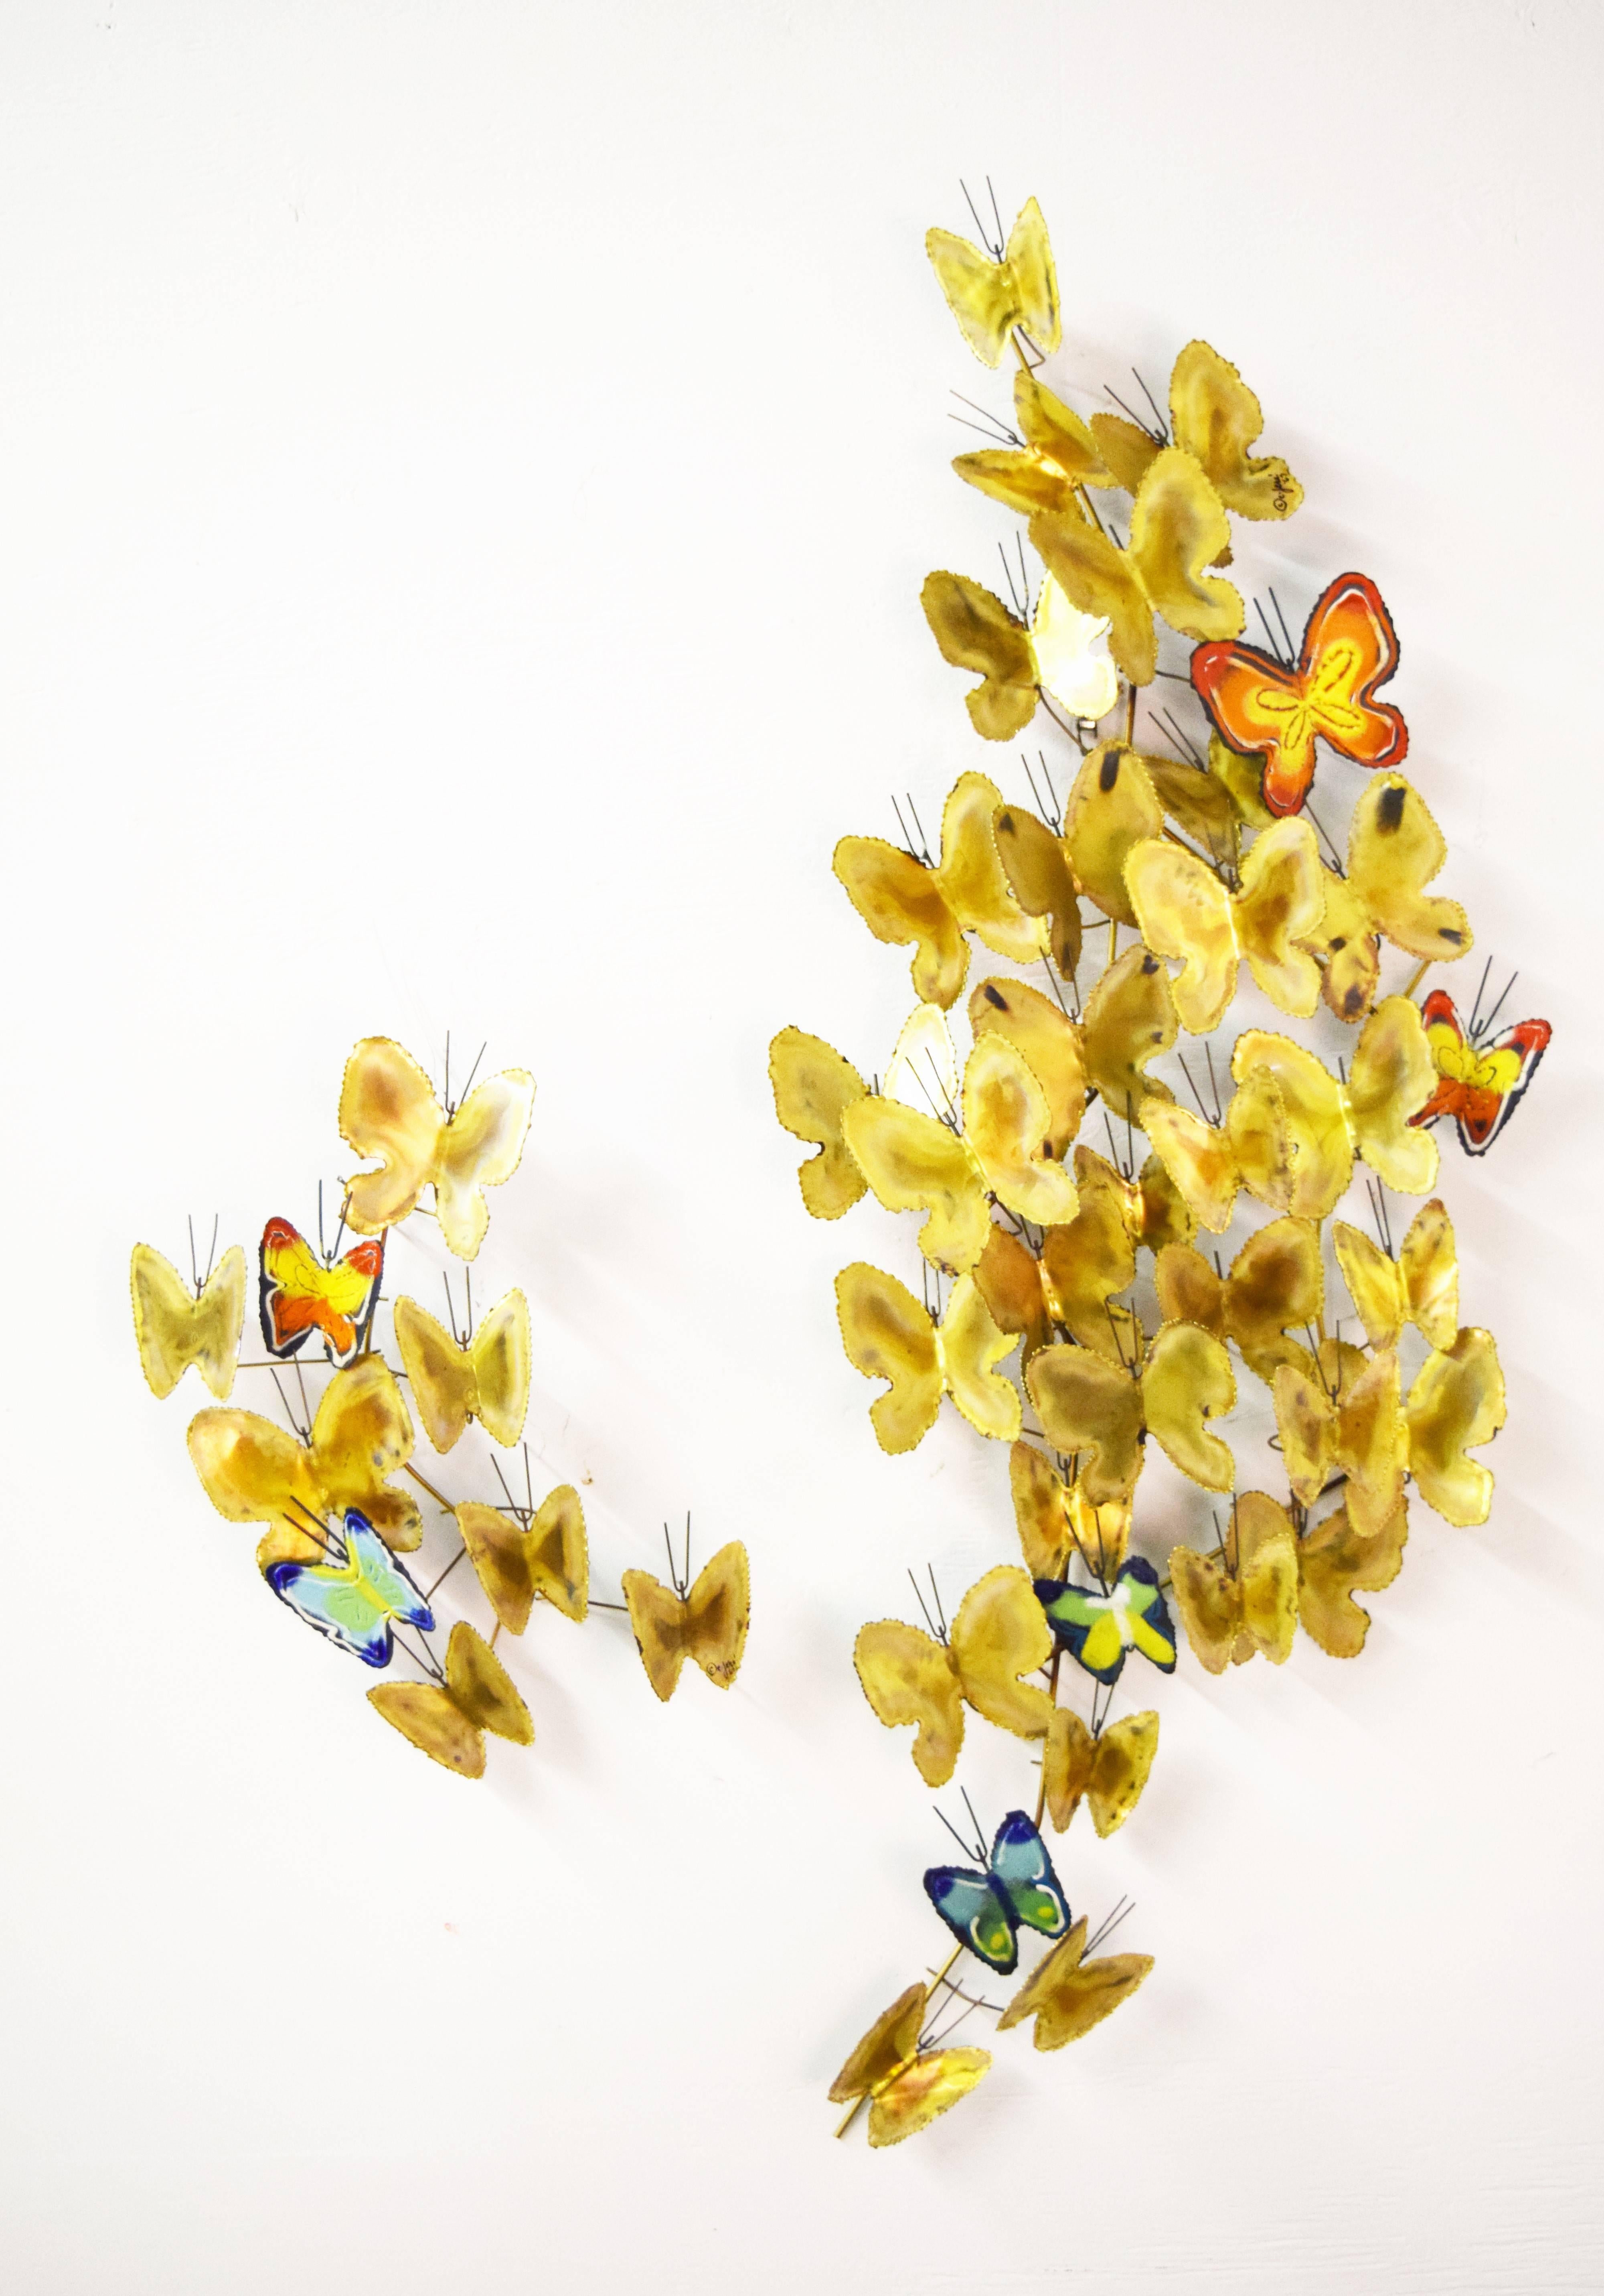 Large Curtis Jere Metal and Enamel Butterfly Wall Sculpture 1967.  

Small Sculpture Dimensions:
5